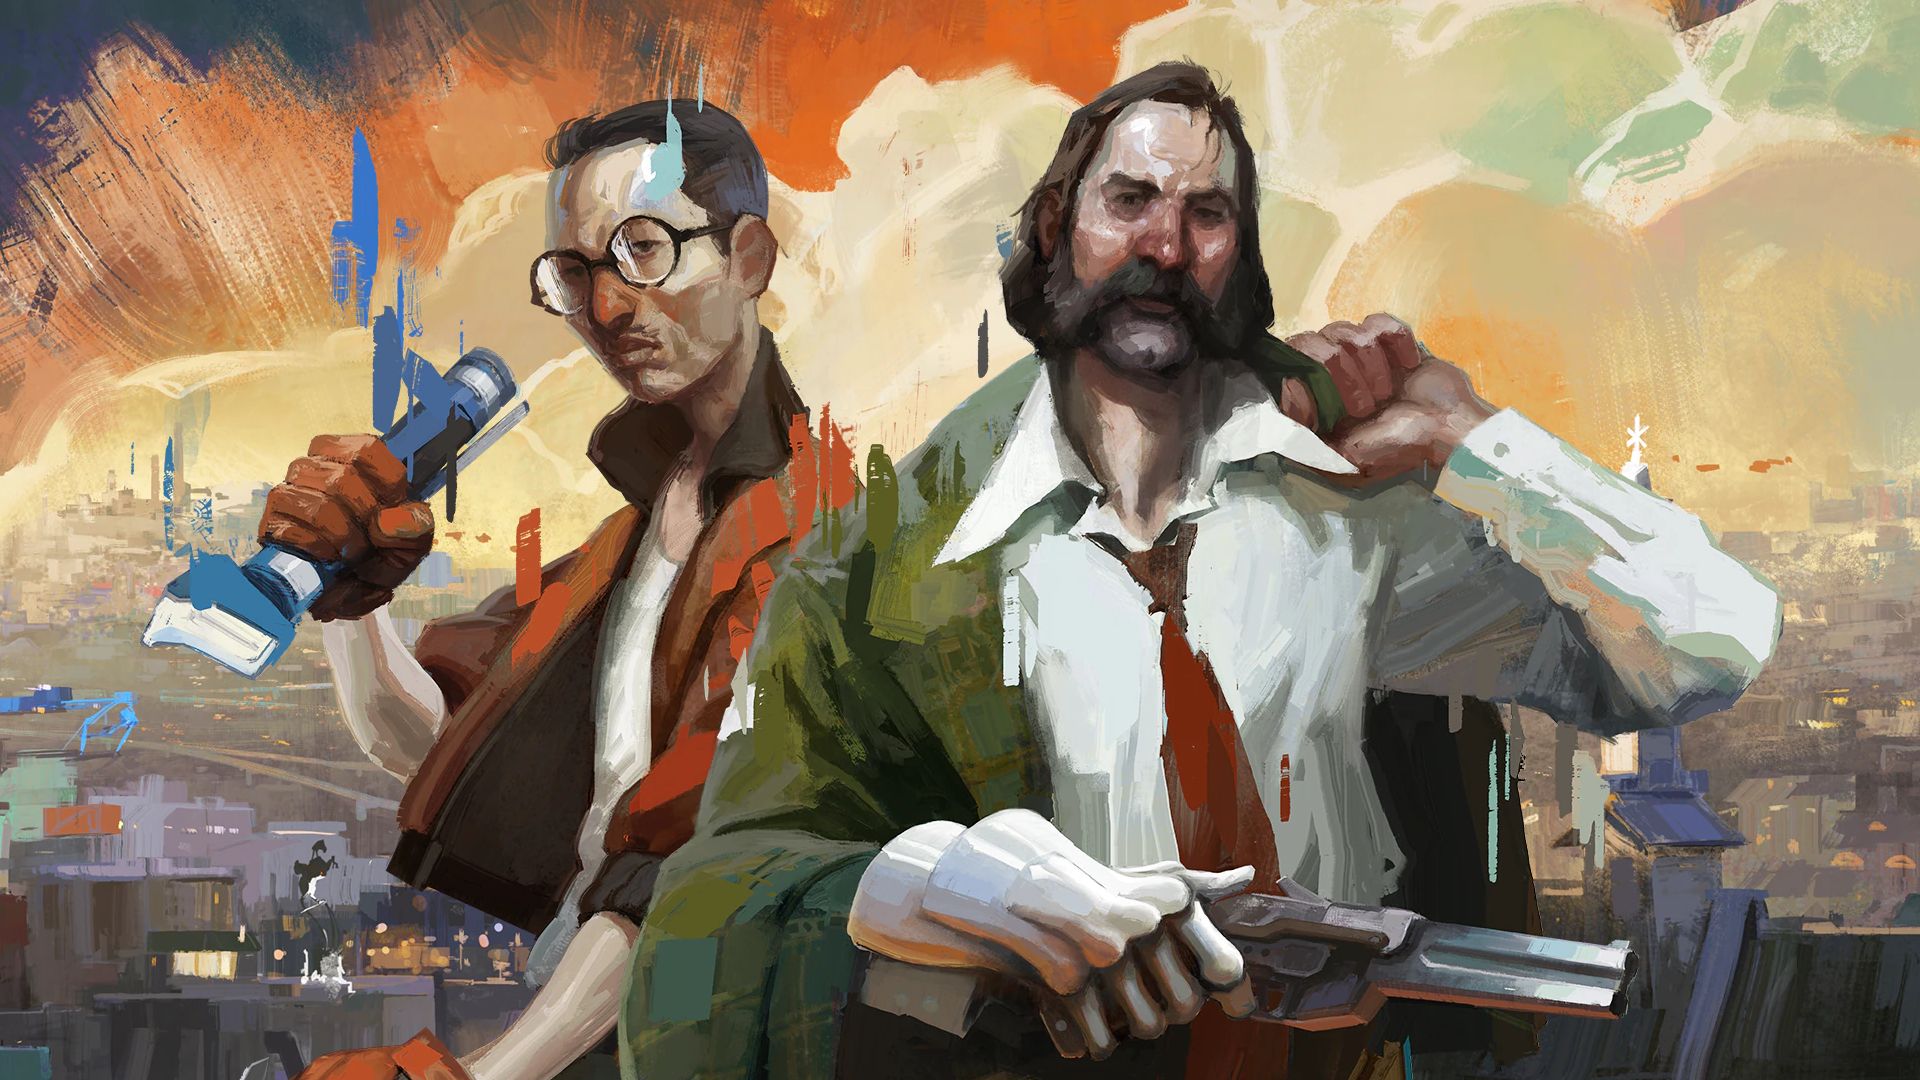 Disco Elysium Sets A New Standard For RolePlaying In Video Games